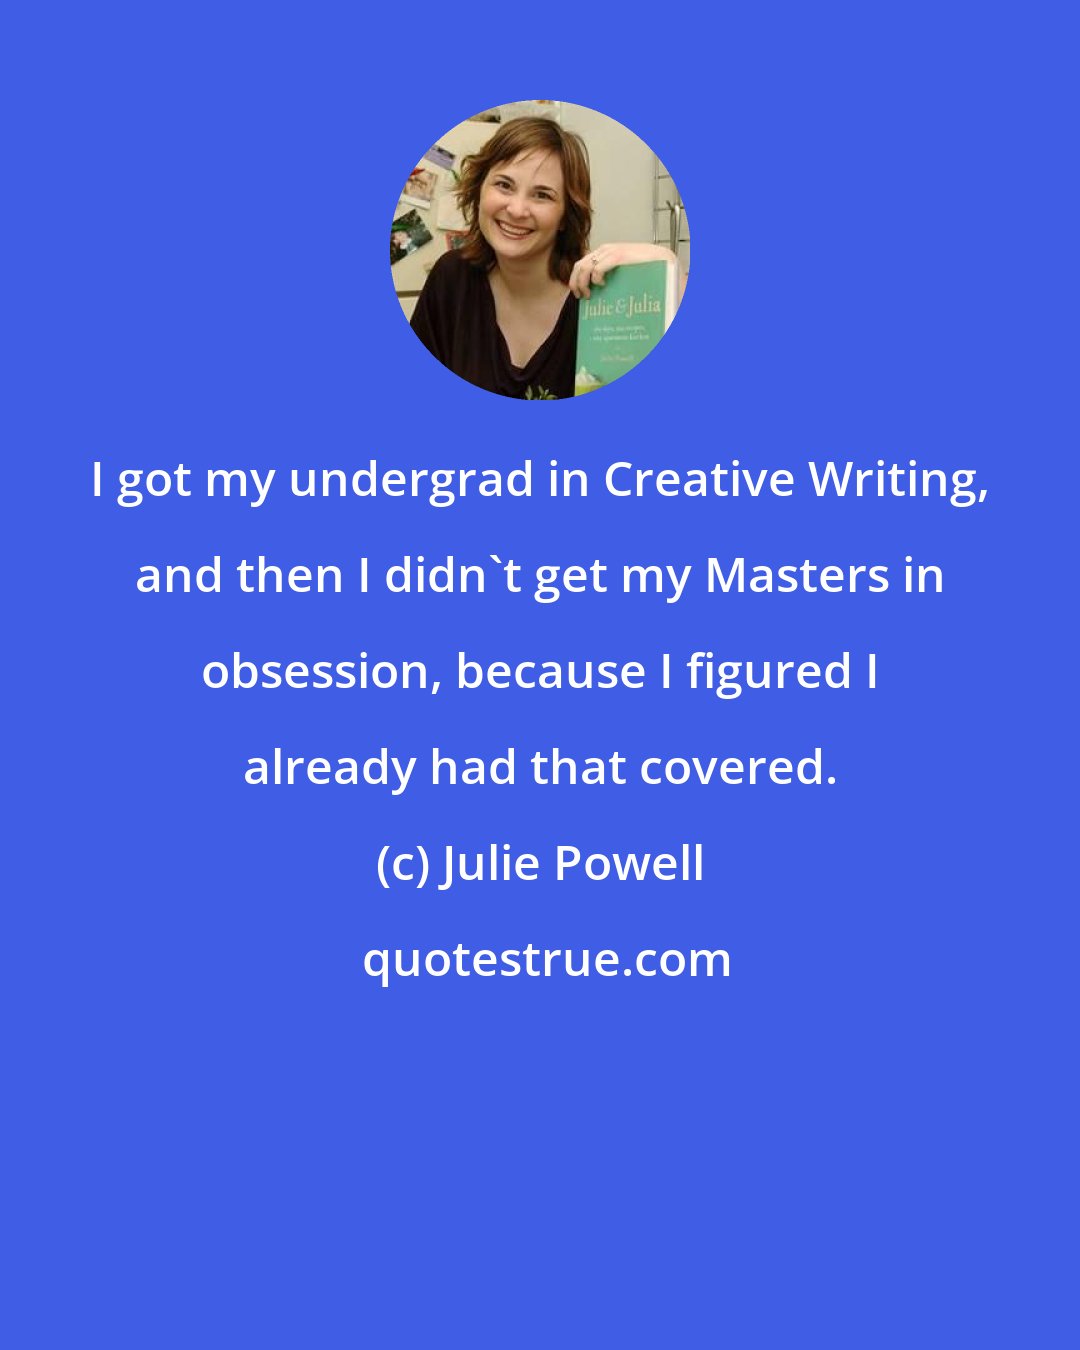 Julie Powell: I got my undergrad in Creative Writing, and then I didn't get my Masters in obsession, because I figured I already had that covered.